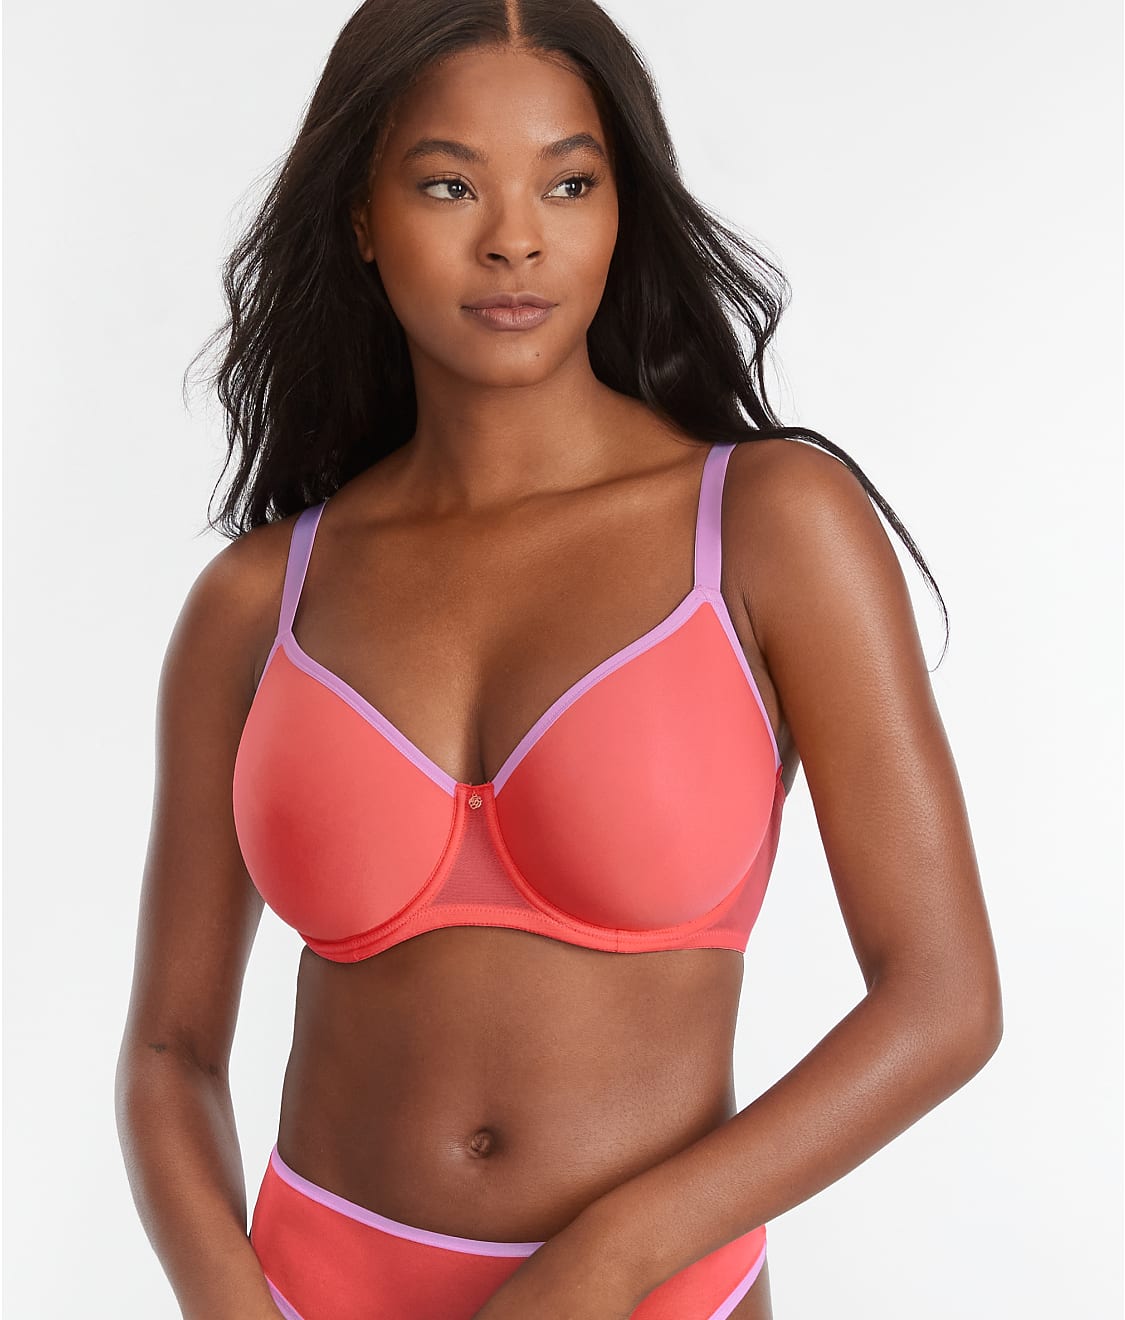 How About This Combo: Sheer Tops & Bright Bras. YES Or NO?